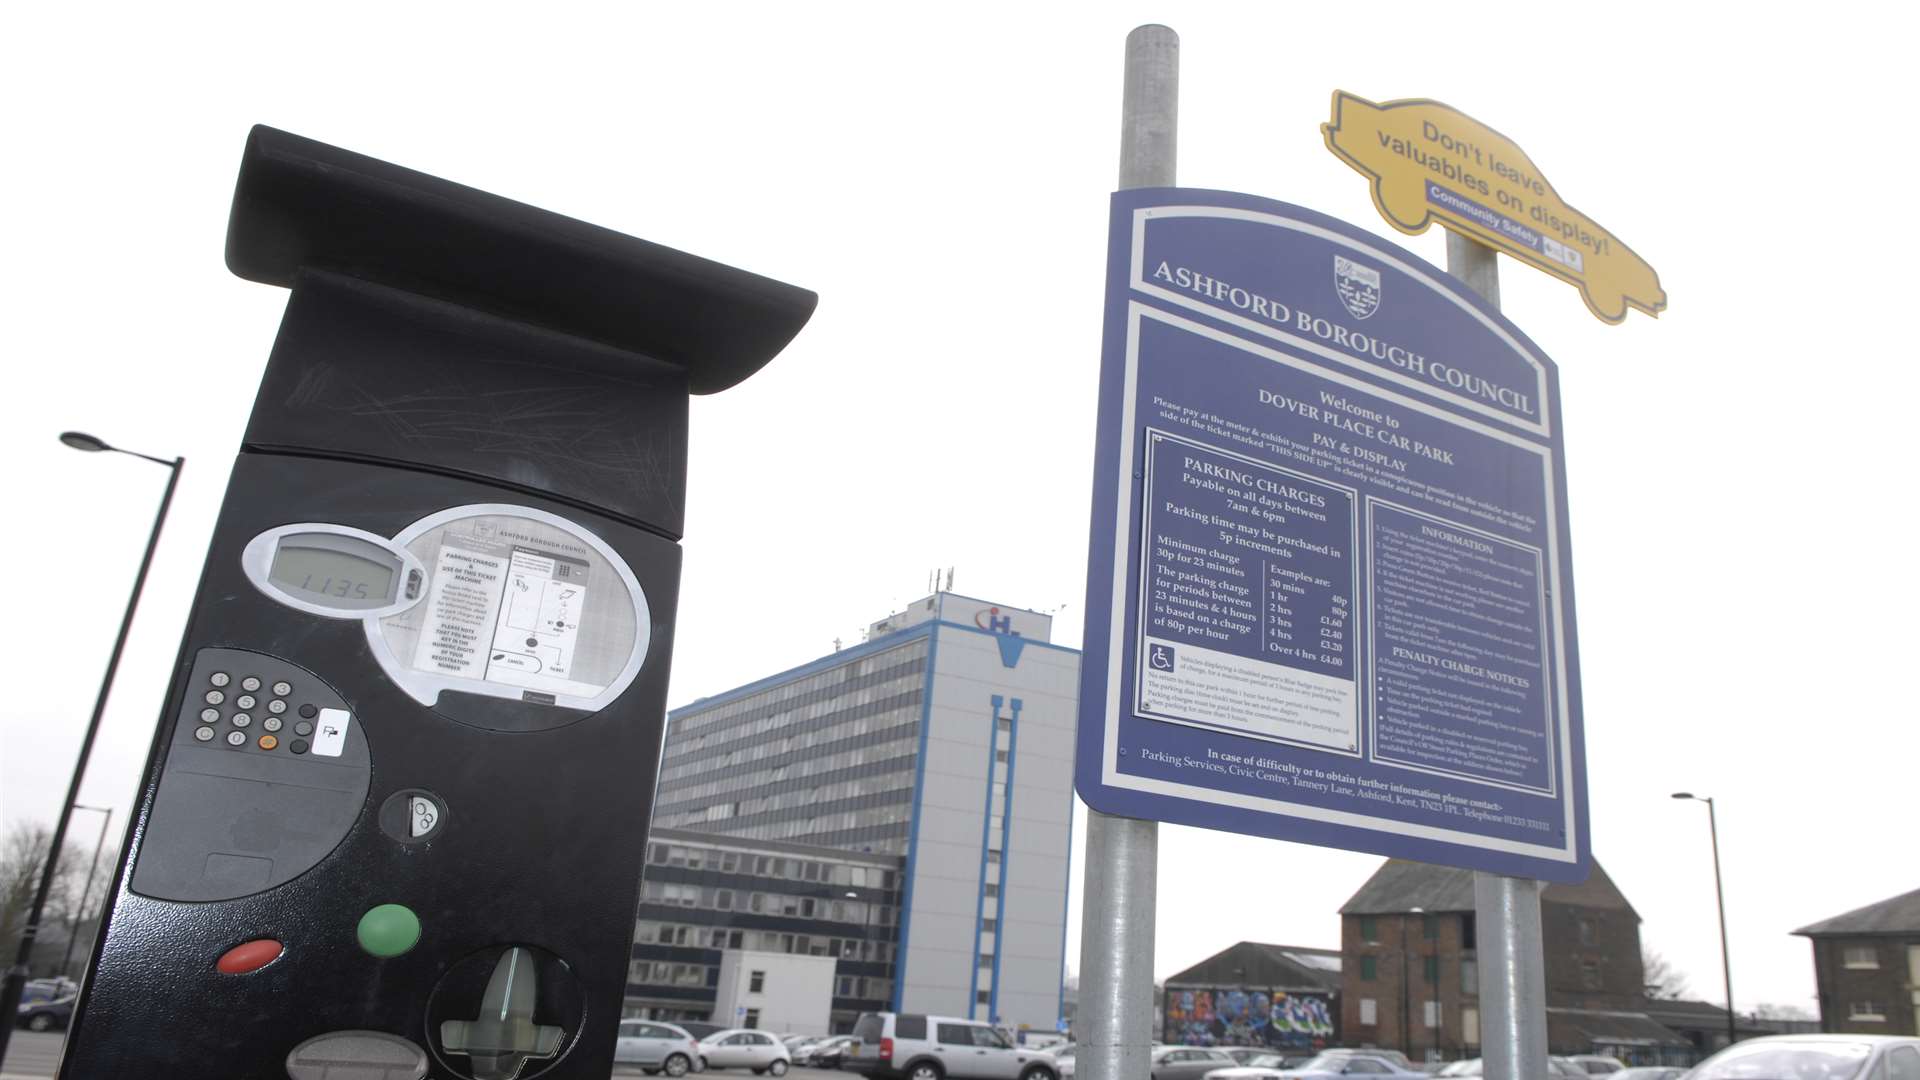 Car parks in Ashford could soon be ticketless